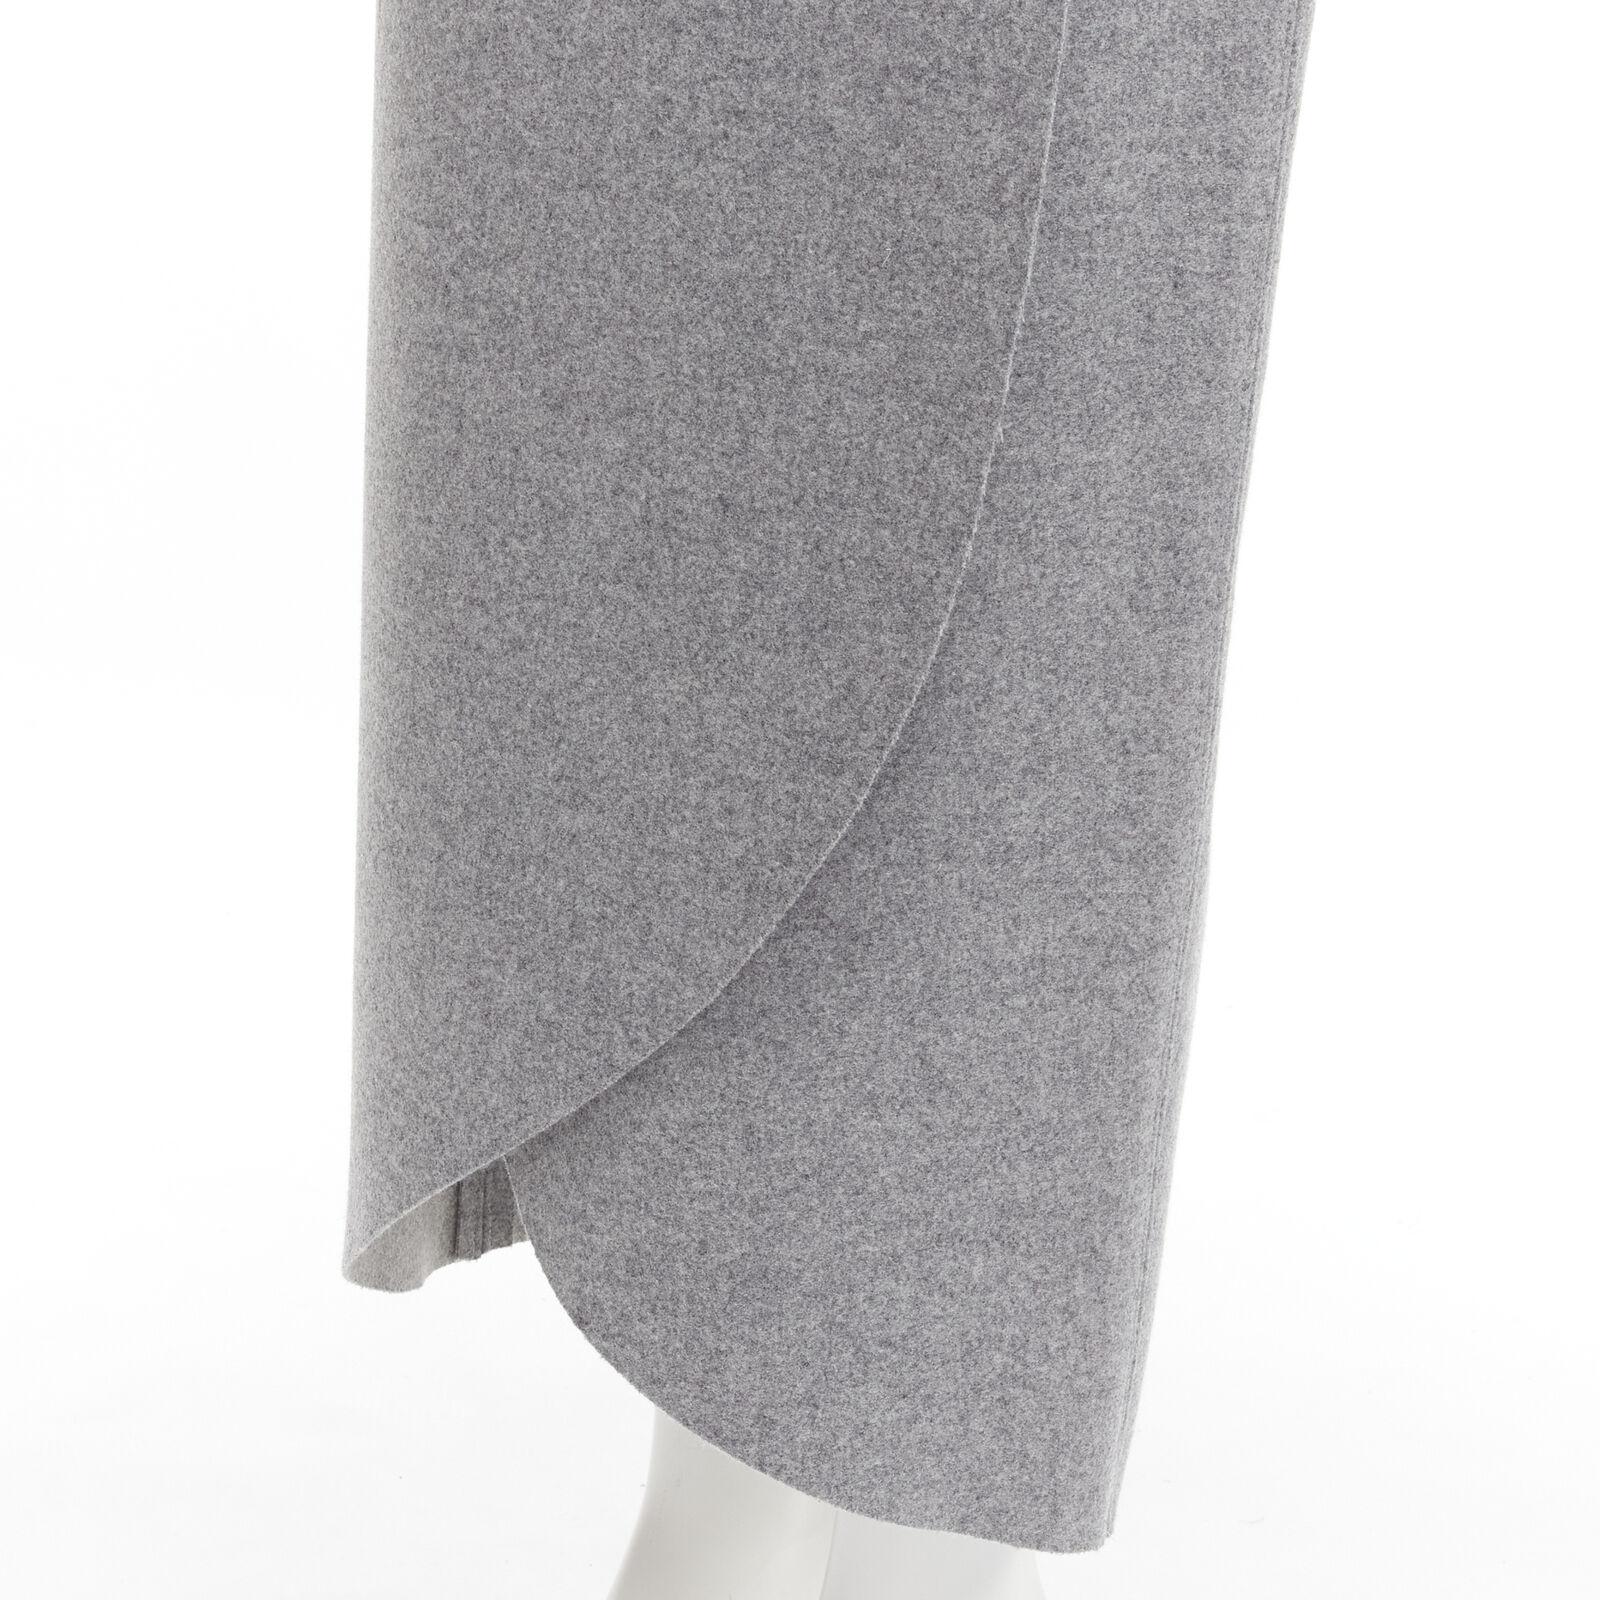 ROSIE ASSOULIN grey wool minimal curved petal high-waisted midi skirt US2 XS
Reference: LNKO/A02045
Brand: Rosie Assoulin
Material: Virgin Wool, Blend
Color: Grey
Pattern: Solid
Closure: Zip
Lining: Fabric
Extra Details: High quality fabric of the